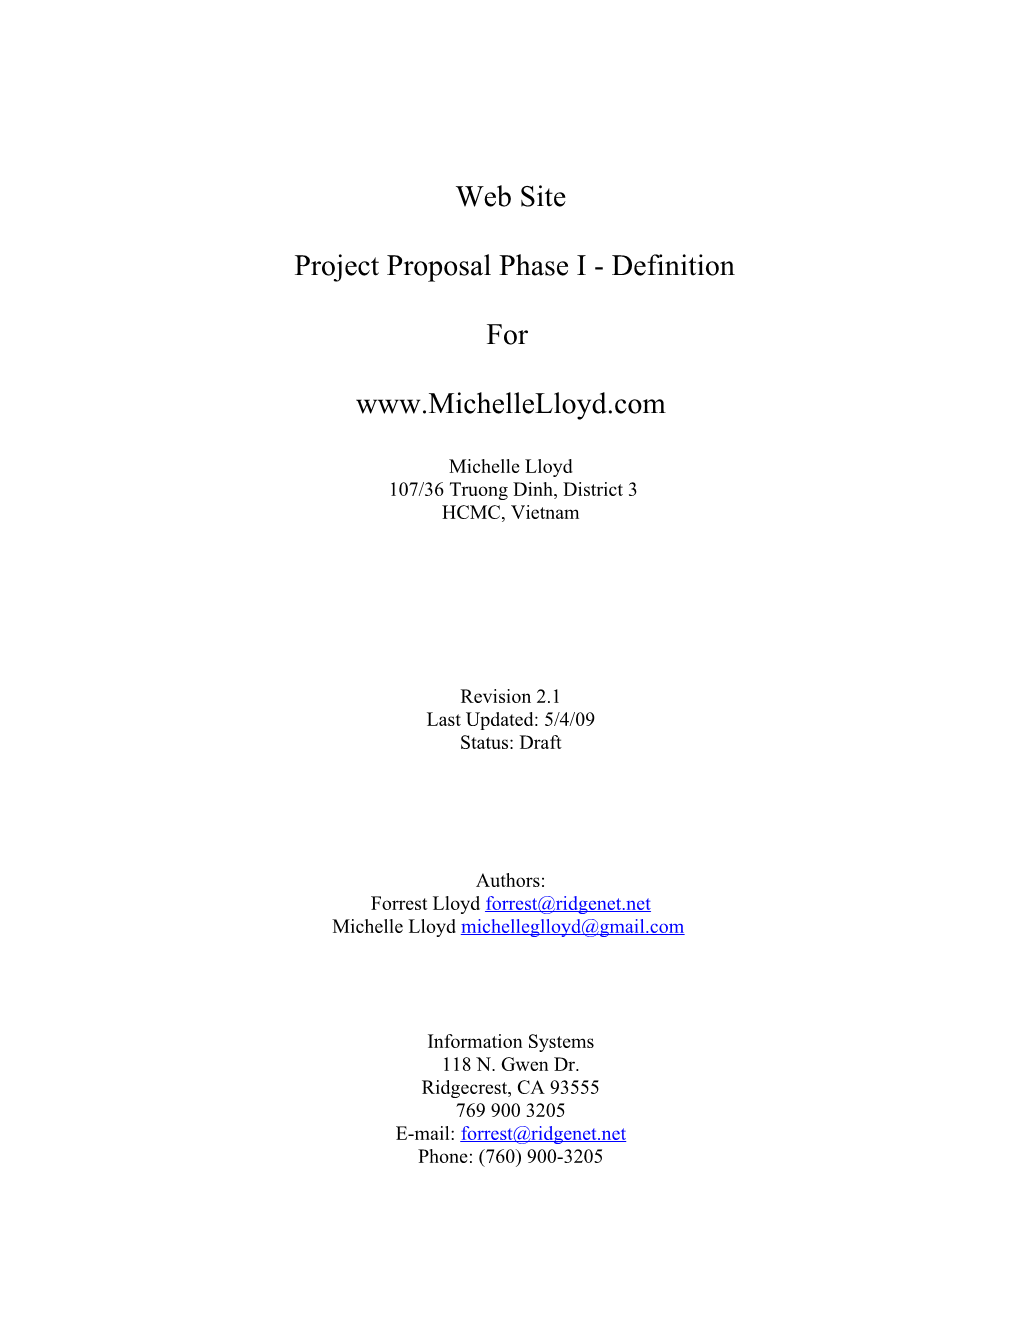 Project Proposal Phase I - Definition